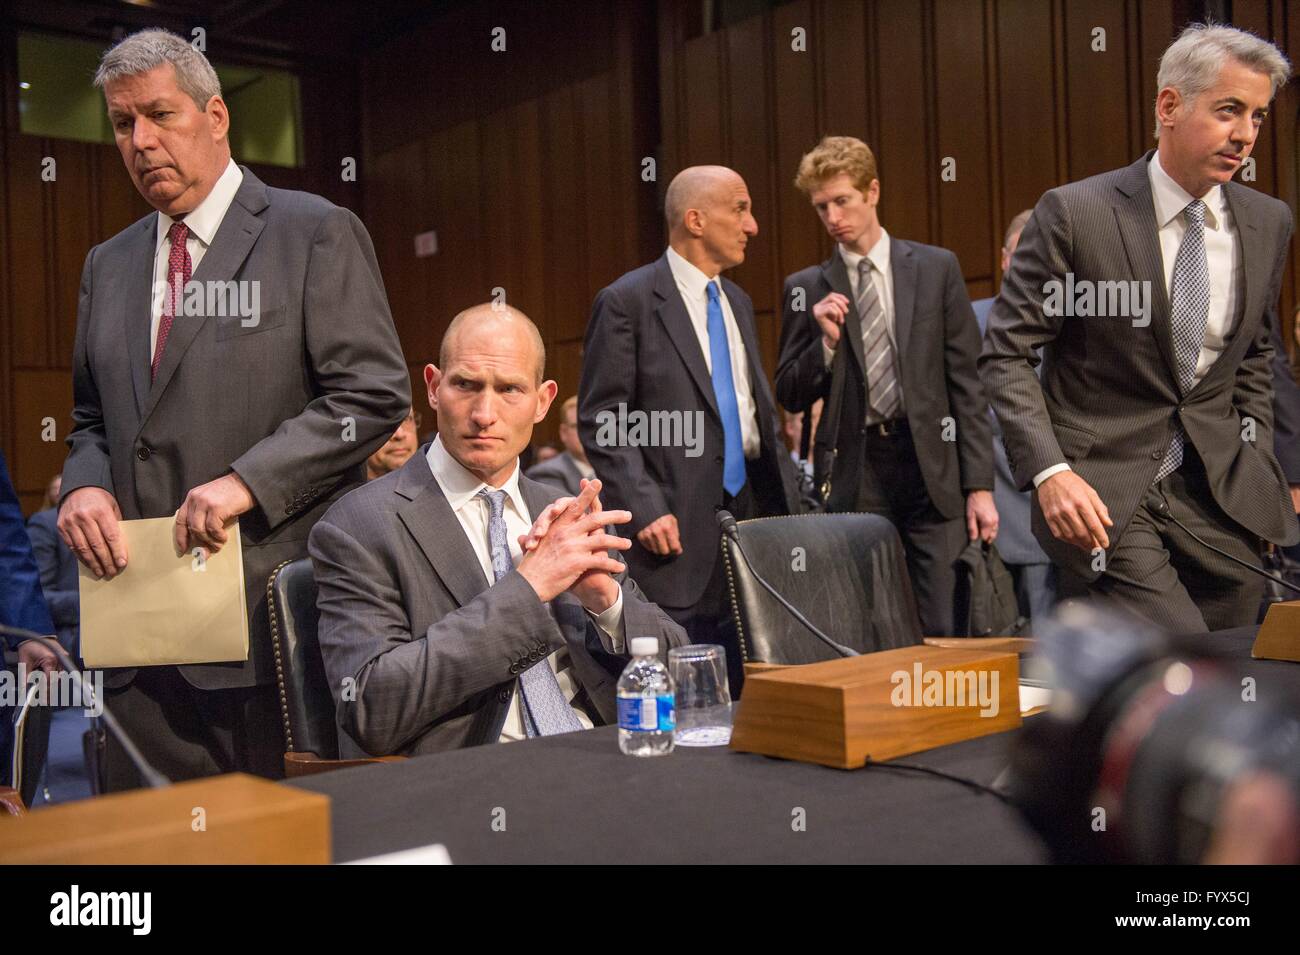 The Valeant Pharmaceuticals executive team arrive to testify at the U.S Senate Committee on Aging hearing on their business practices at Capitol Hill April 27, 2016 in Washington, DC. (L to R): Valeant CEO Michael Pearson, Former CFO Howard Schiller, and Pershing Square Capitol William Ackman. Stock Photo